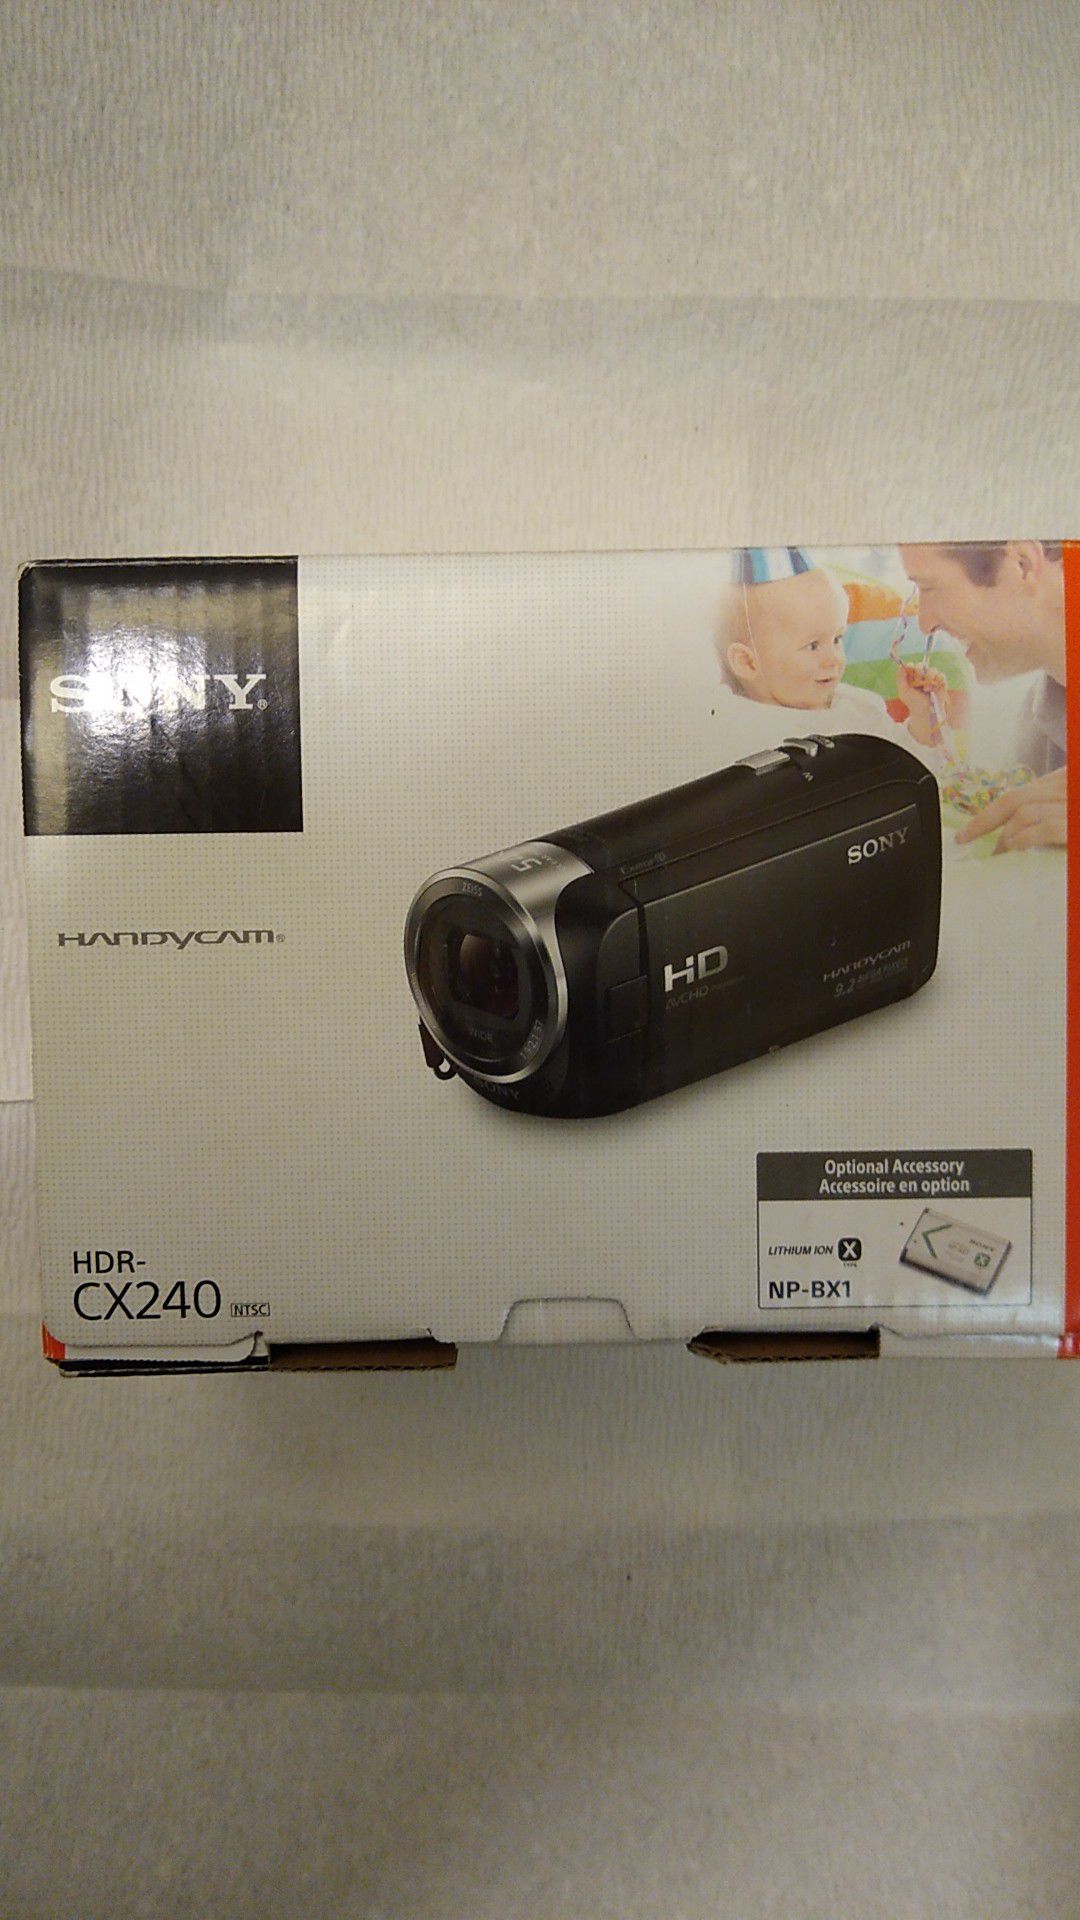 New still boxed Sony Handycam (HDR-CX240) Now priced to sell!